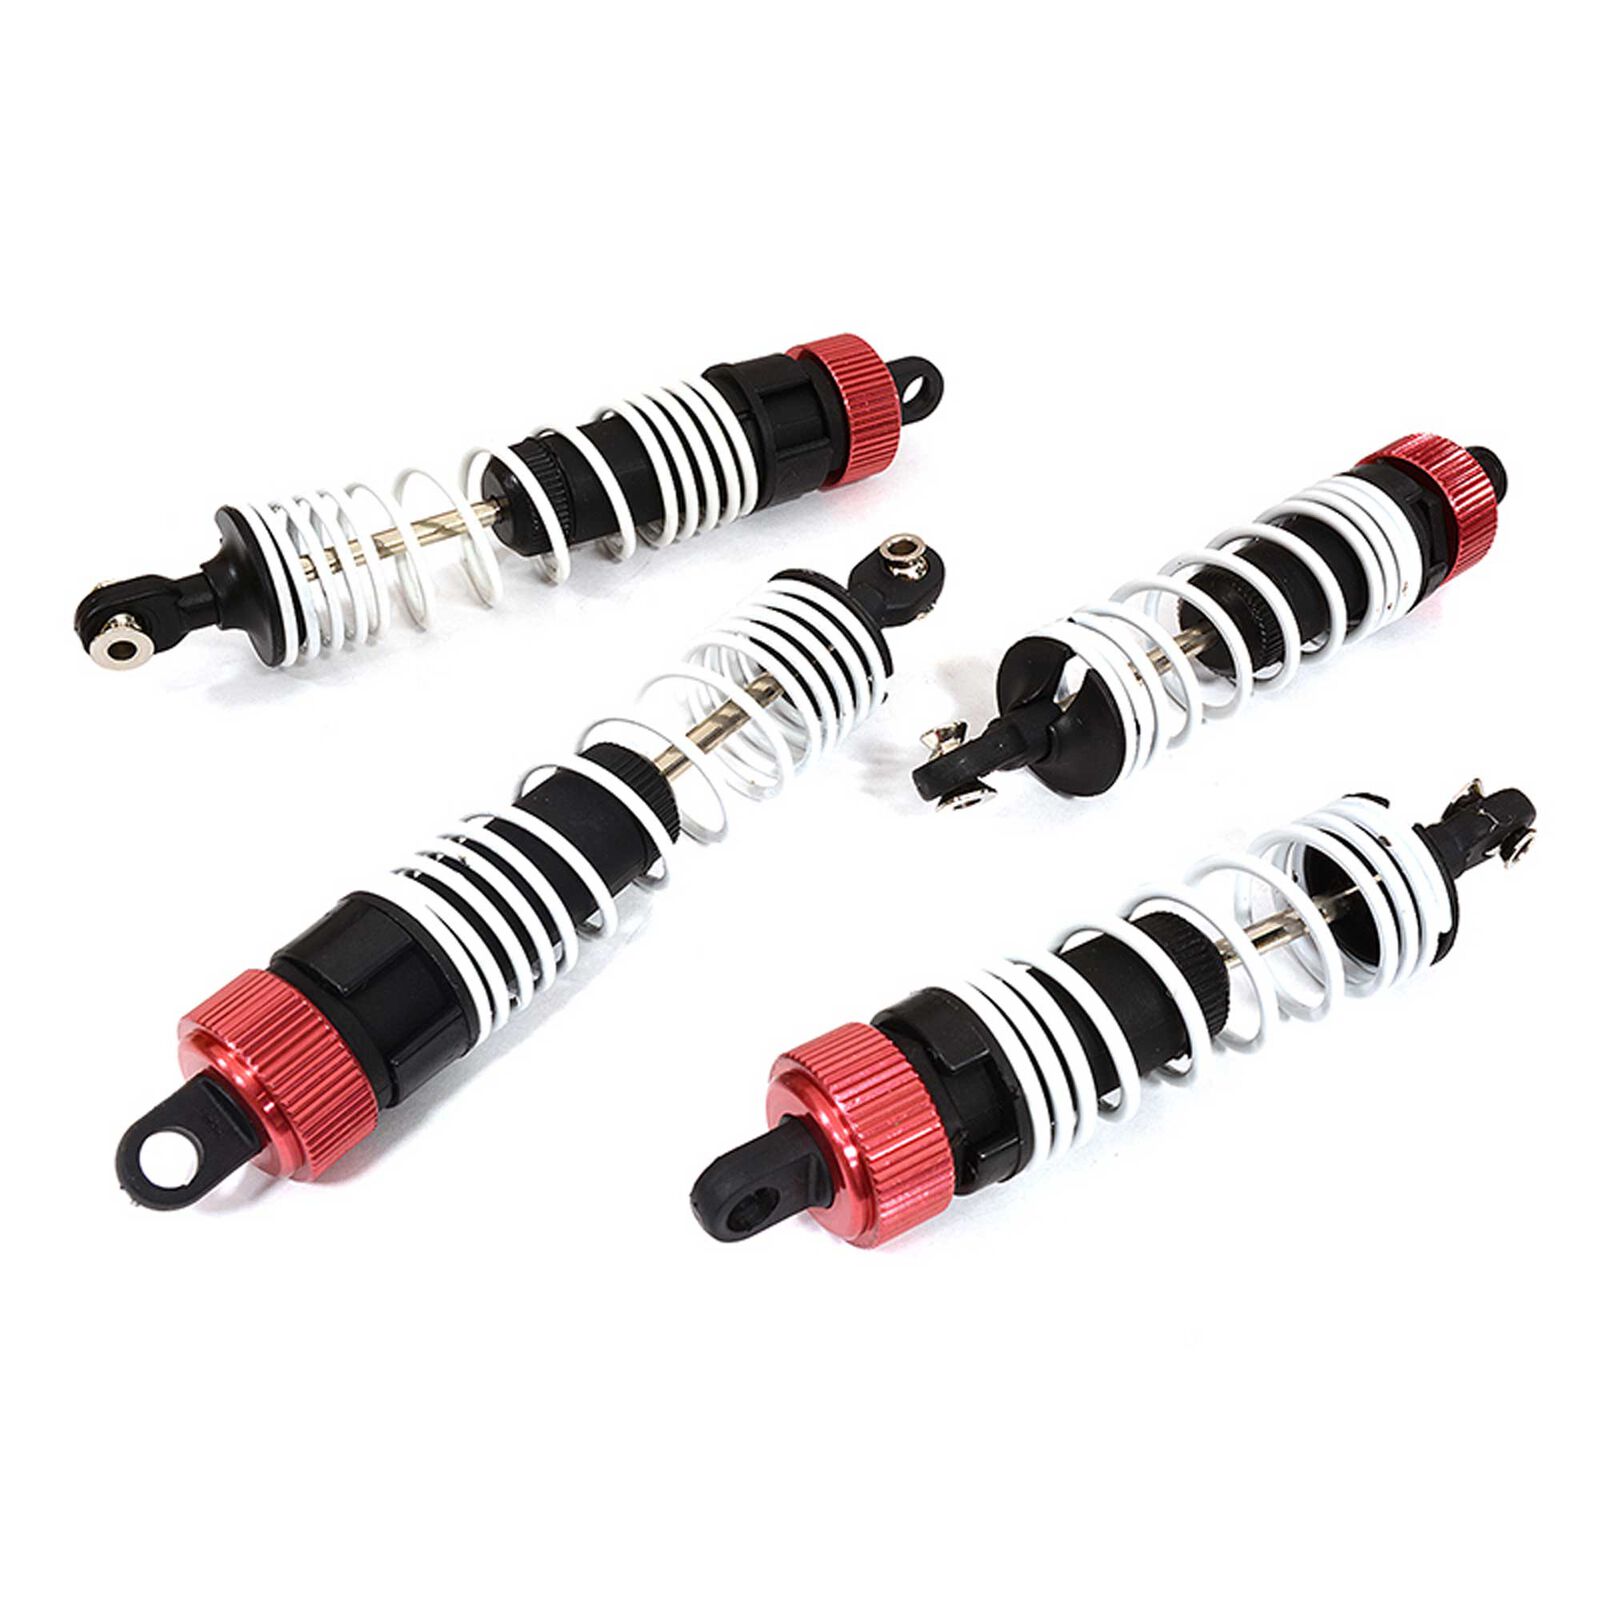 1/10 Buggy / Truck Shock Set, Red: (2x83mm, 2x110mm)